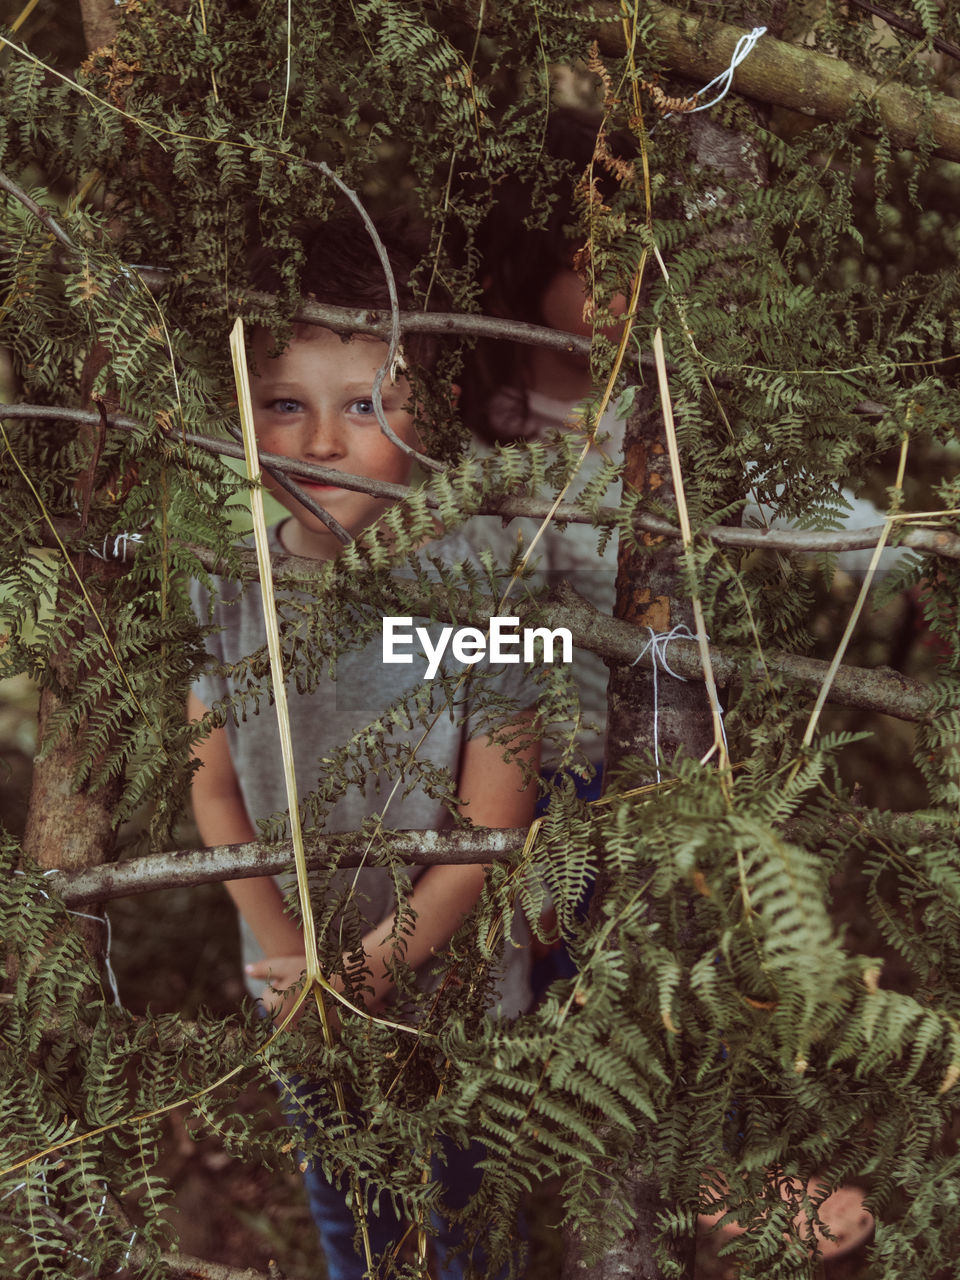 Caucasian child in a hut made of branches and leaves